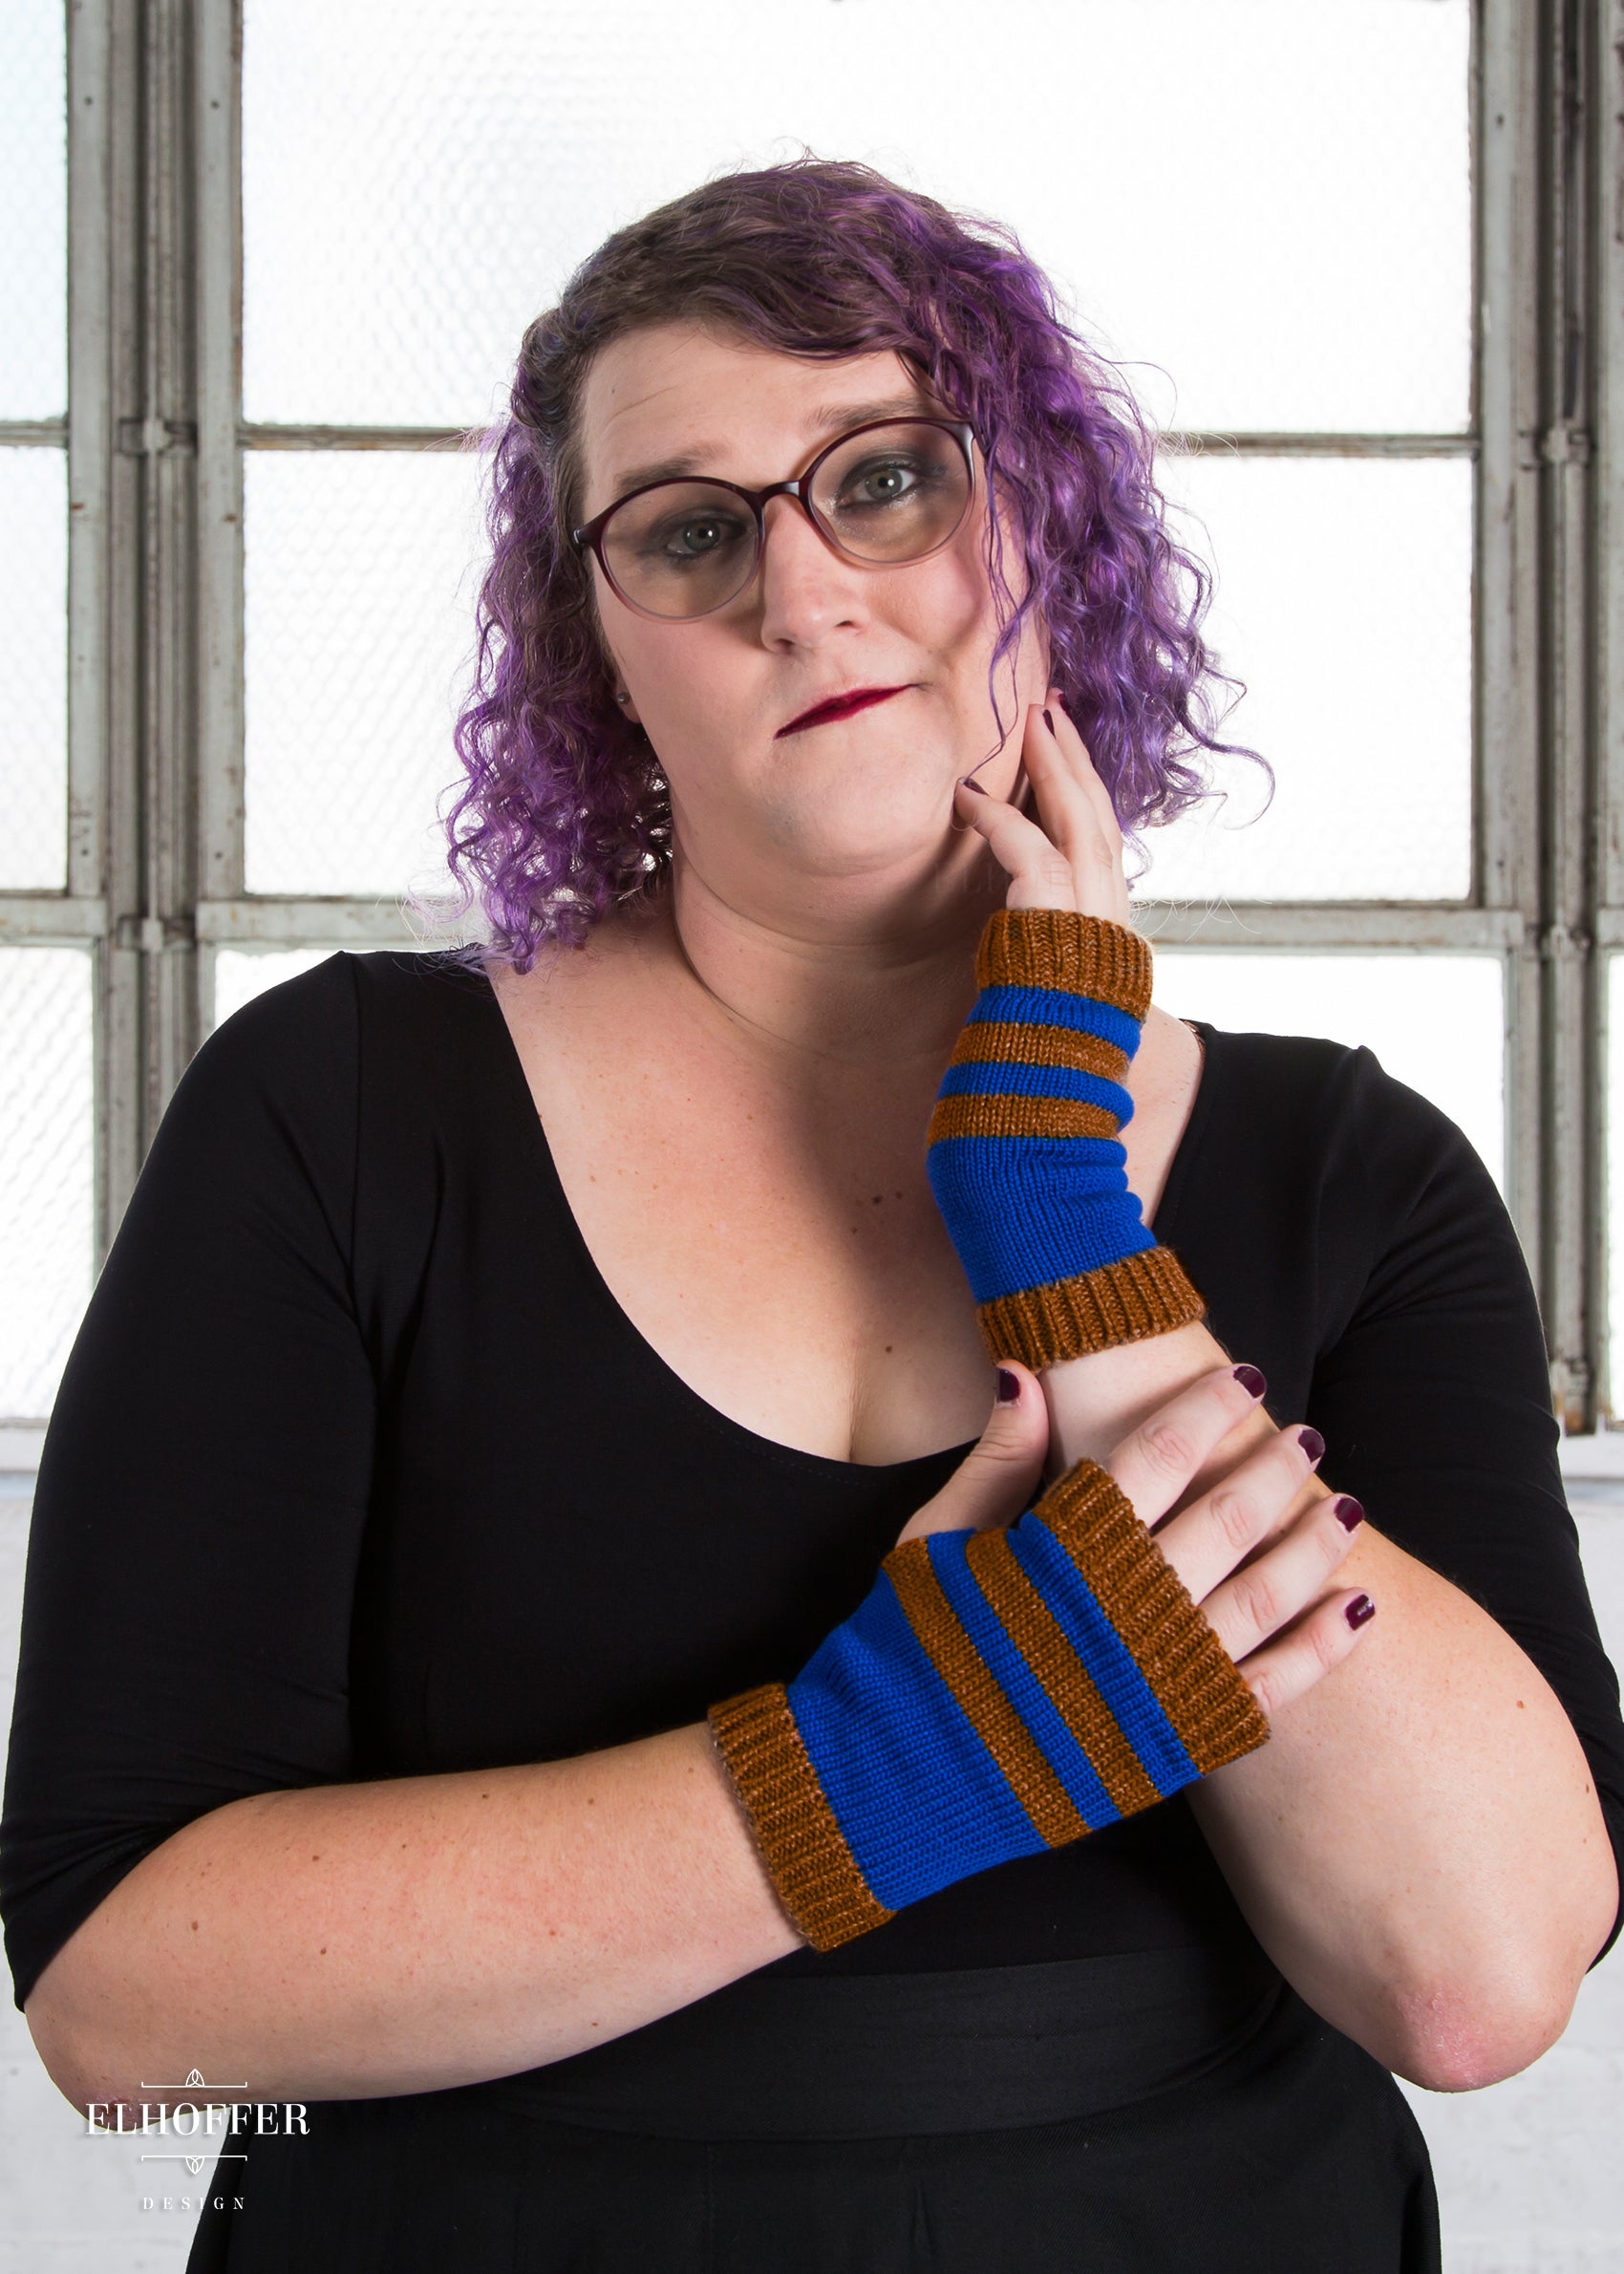 Riley, a fair skinned size XL model with curly purple hair, is wearing a pair of bronze and blue striped fingerless gloves.